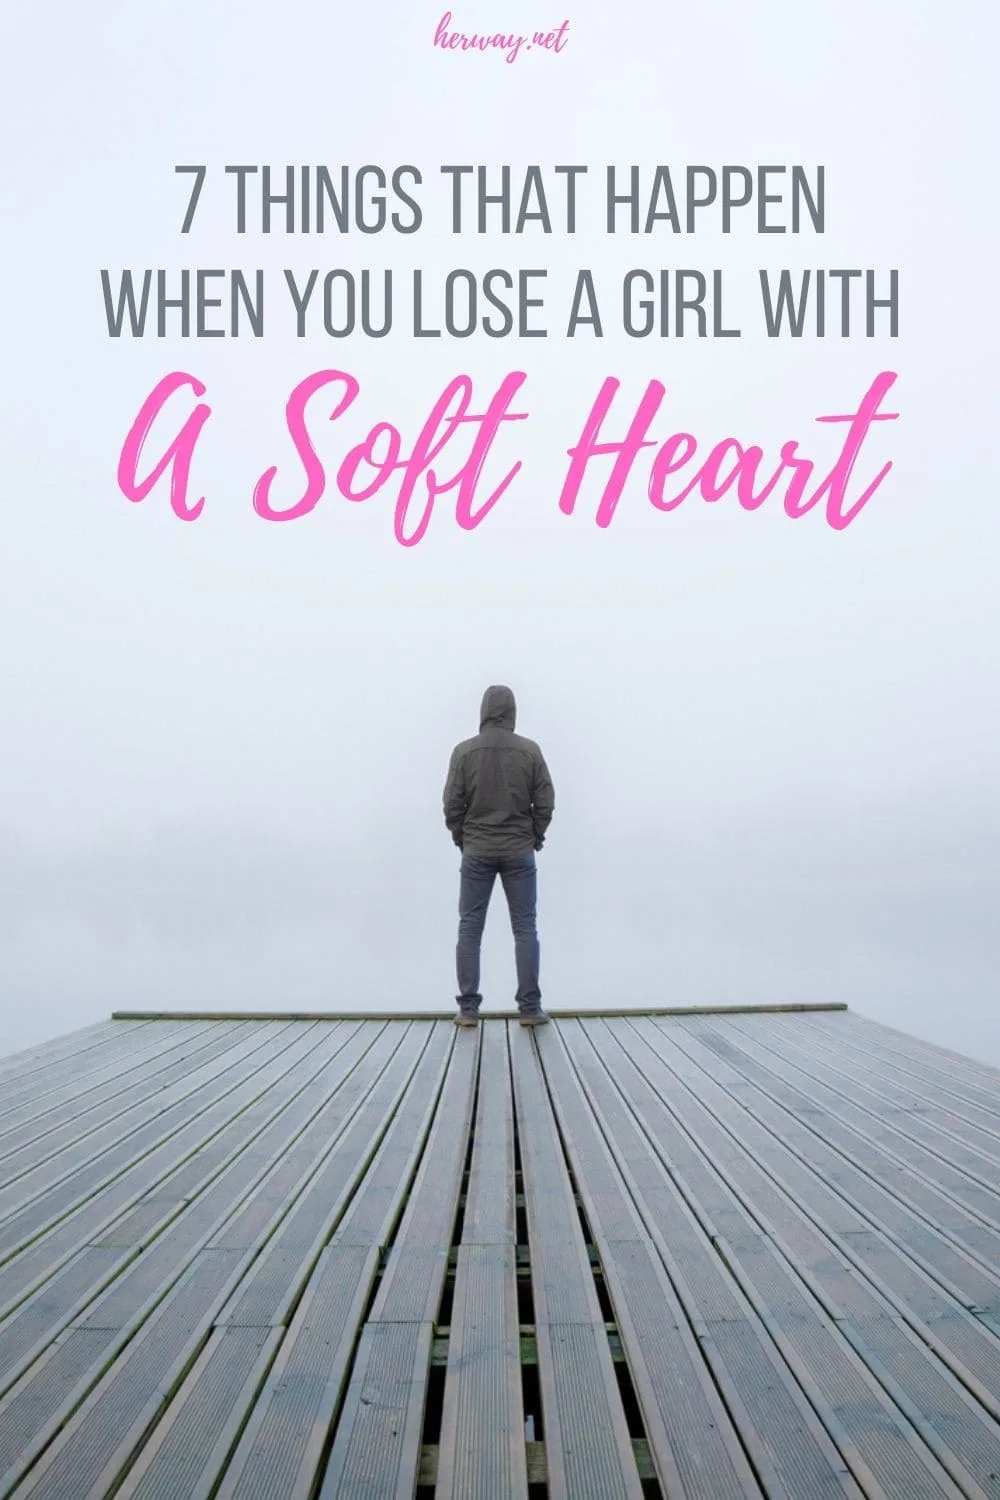 7 Things That Happen When You Lose A Girl With A Soft Heart